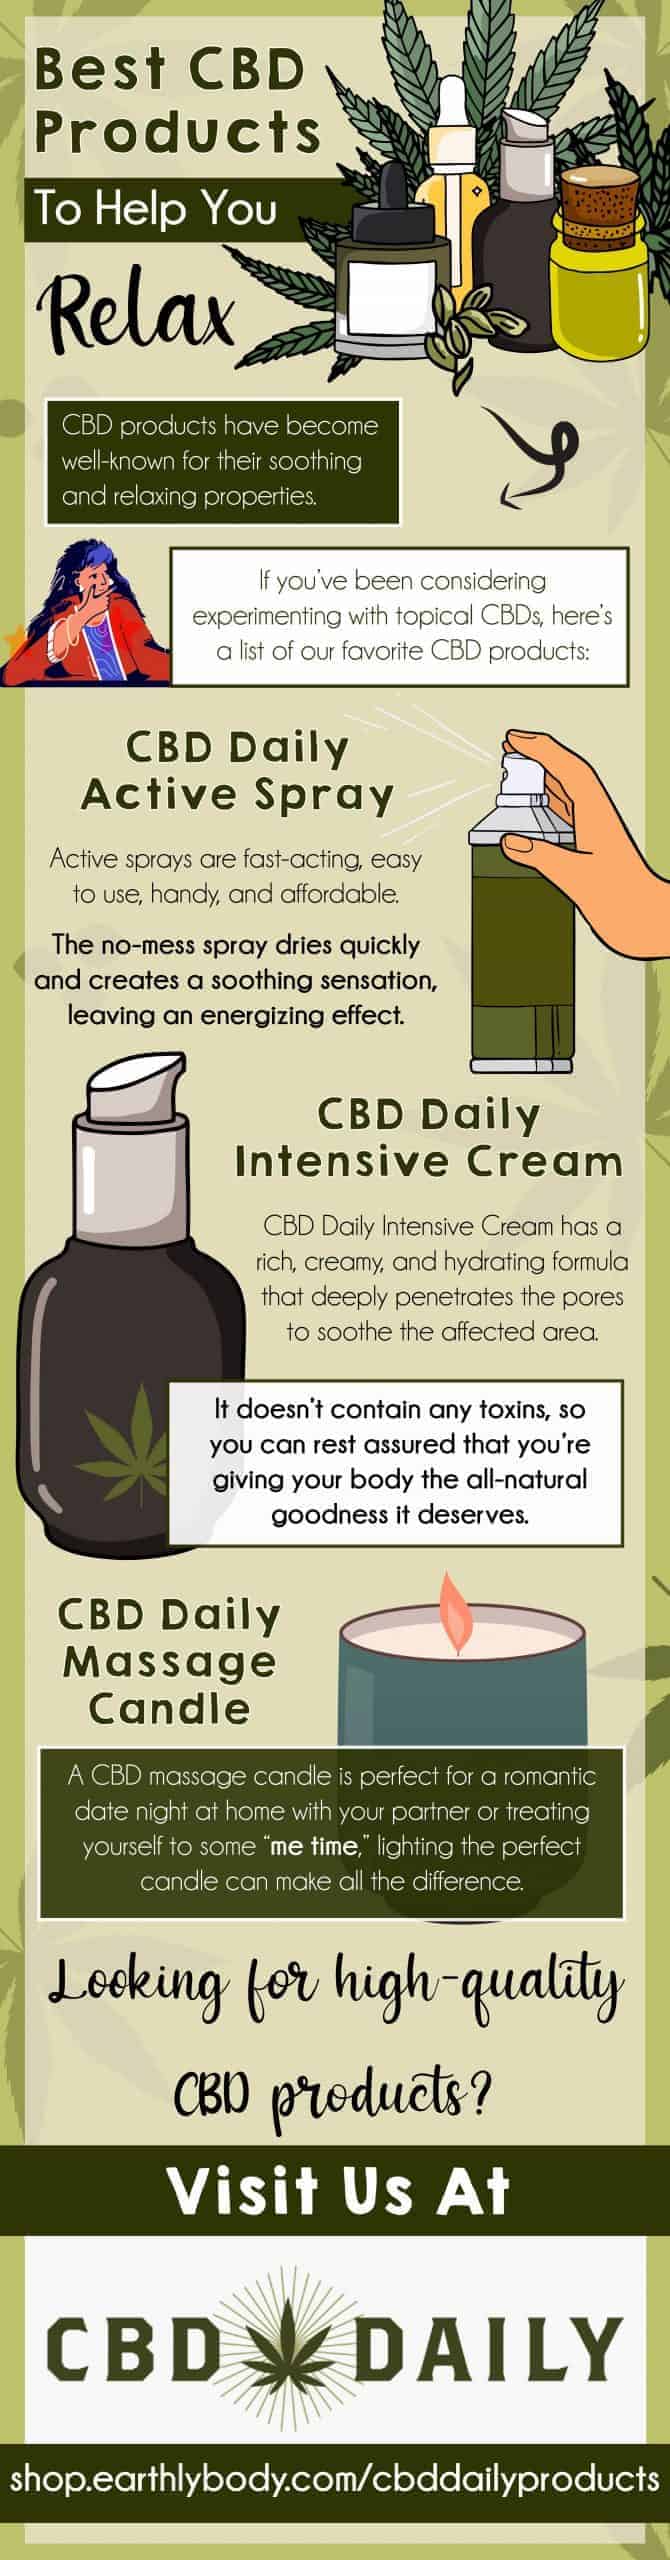 Best CBD Products To Help You Relax